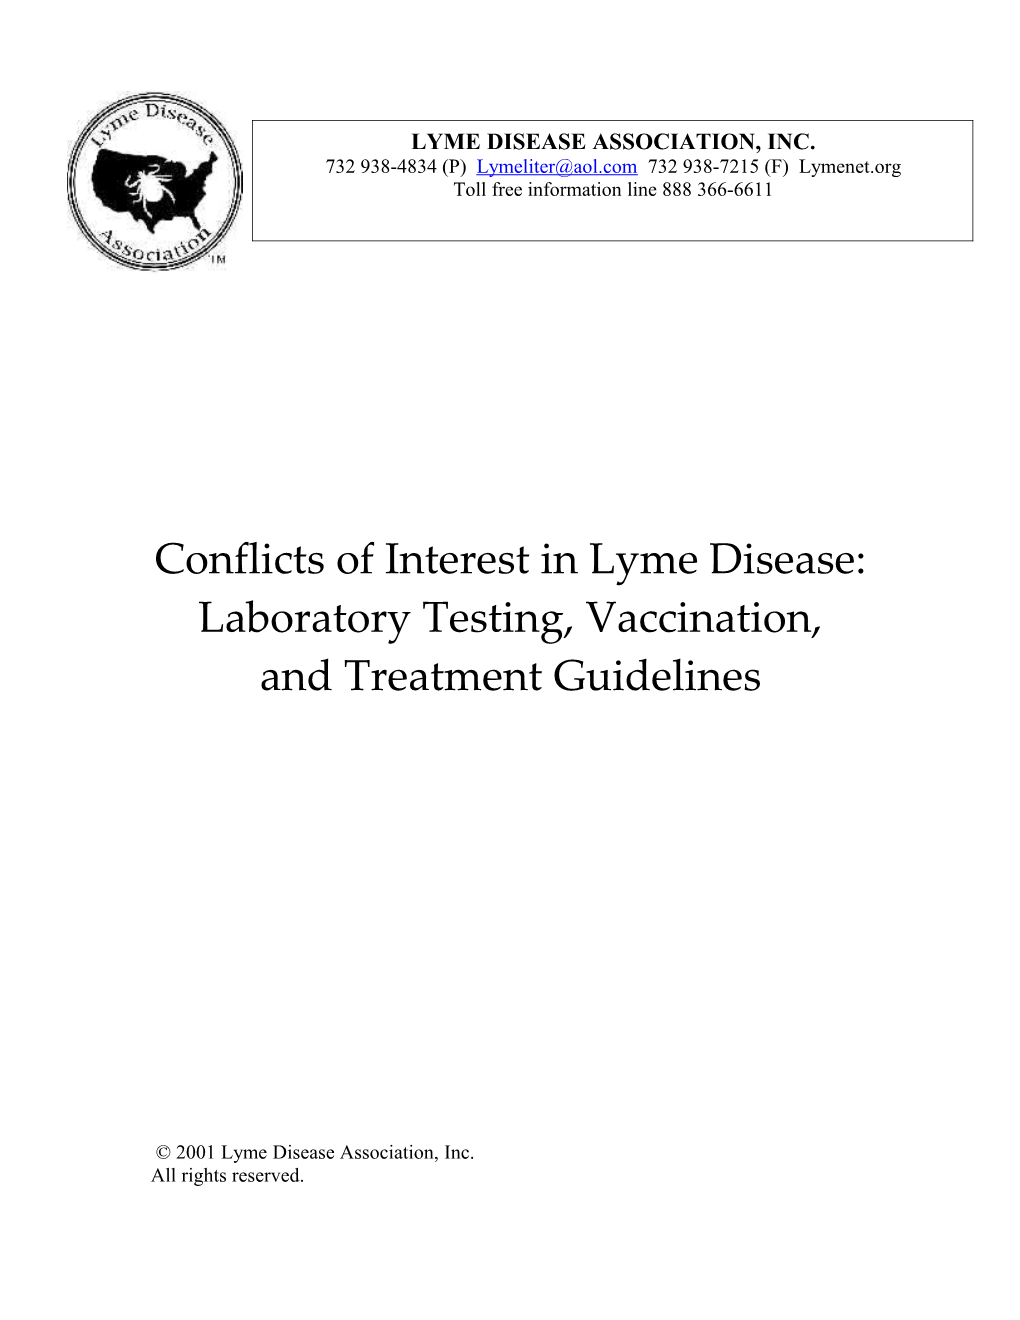 Conflicts of Interest in Lyme Disease